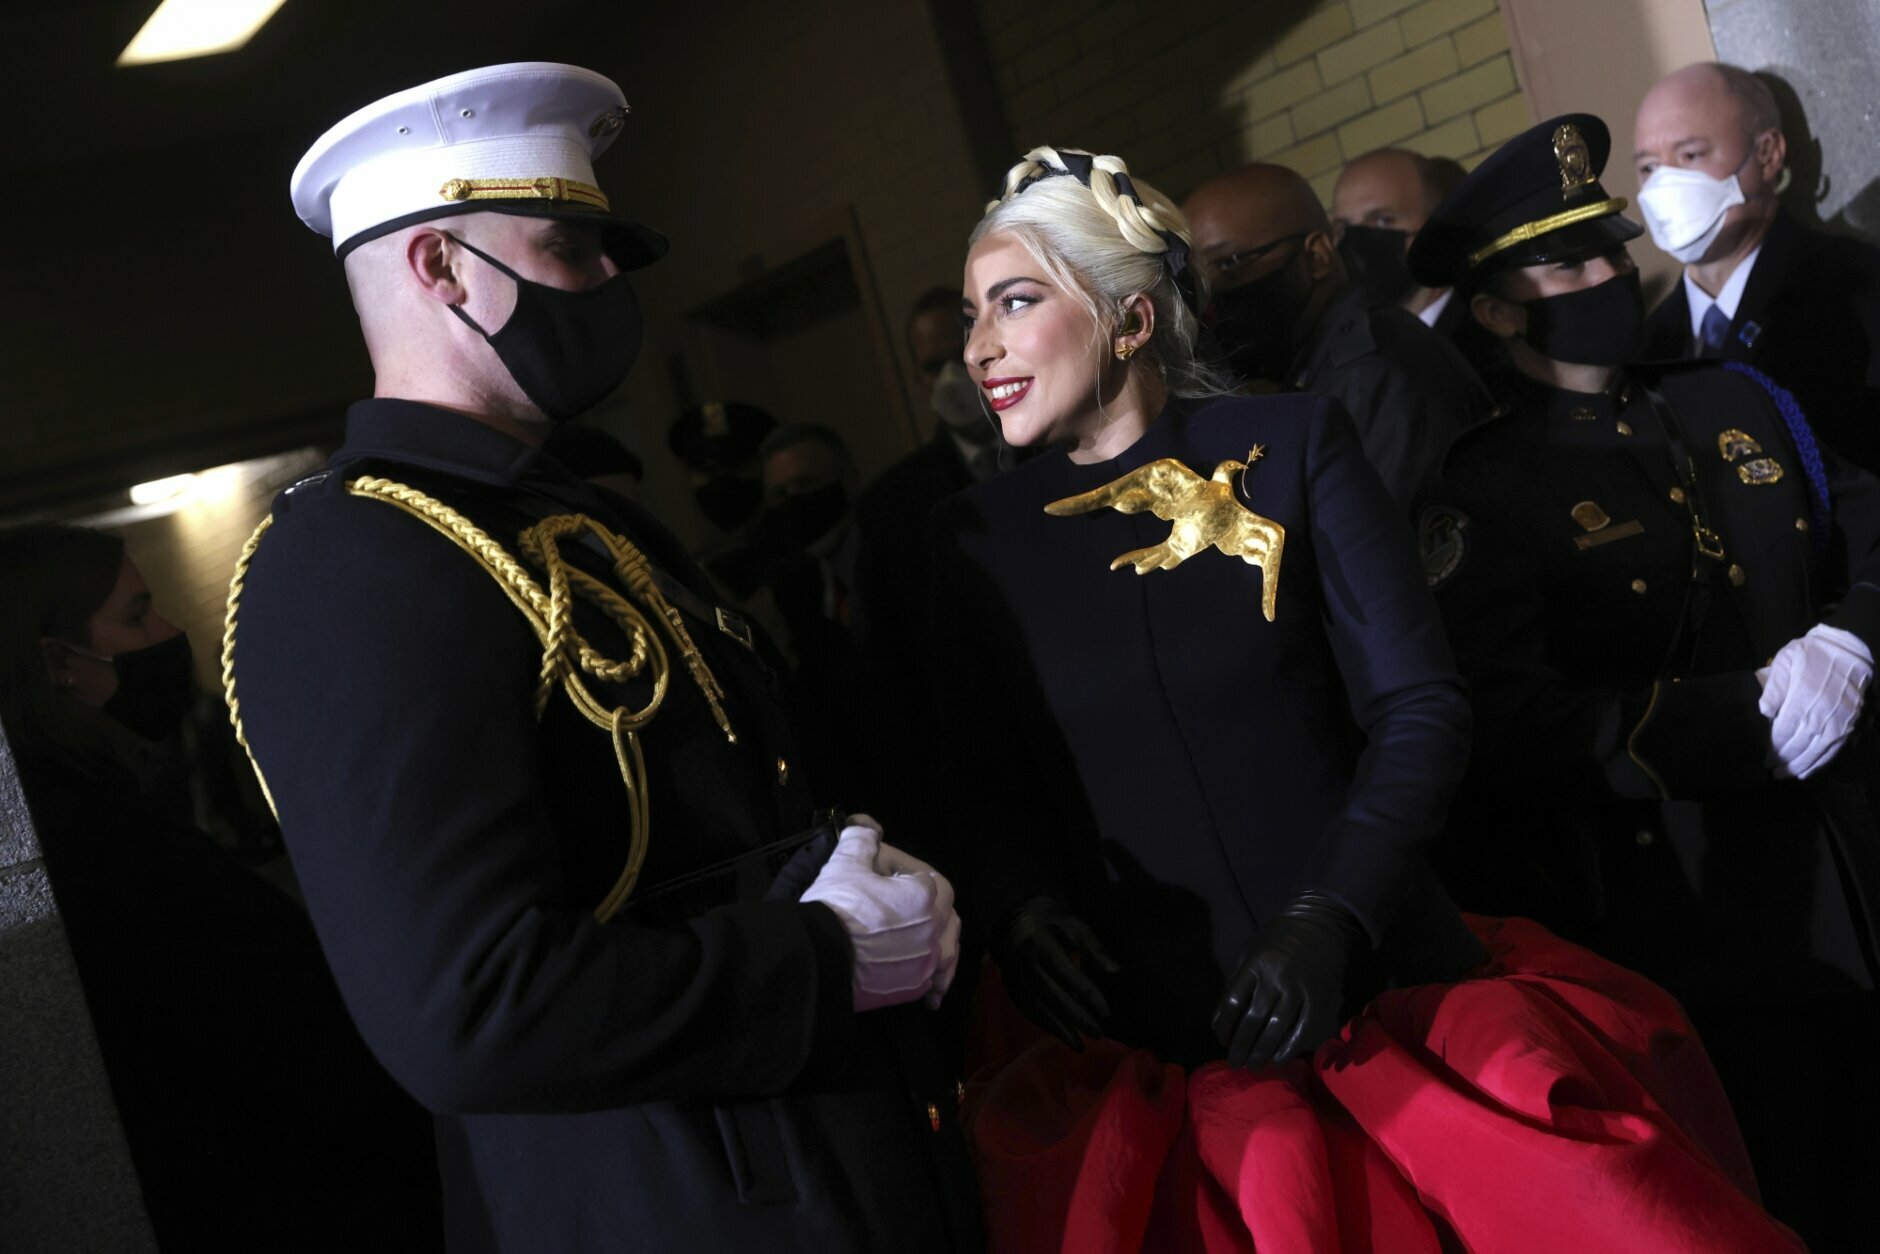 <p>Lady Gaga posted her thoughts to Instagram ahead of Wednesday&#8217;s events.</p>
<blockquote class="instagram-media" style="background: #FFF; border: 0; border-radius: 3px; box-shadow: 0 0 1px 0 rgba(0,0,0,0.5),0 1px 10px 0 rgba(0,0,0,0.15); margin: 1px; max-width: 540px; min-width: 326px; padding: 0; width: calc(100% - 2px);" data-instgrm-captioned="" data-instgrm-permalink="https://www.instagram.com/p/CKPcRVysTUp/?utm_source=ig_embed&amp;utm_campaign=loading" data-instgrm-version="13">
<div style="padding: 16px;">
<p>&nbsp;</p>
<div style="display: flex; flex-direction: row; align-items: center;">
<div style="background-color: #f4f4f4; border-radius: 50%; flex-grow: 0; height: 40px; margin-right: 14px; width: 40px;"></div>
<div style="display: flex; flex-direction: column; flex-grow: 1; justify-content: center;">
<div style="background-color: #f4f4f4; border-radius: 4px; flex-grow: 0; height: 14px; margin-bottom: 6px; width: 100px;"></div>
<div style="background-color: #f4f4f4; border-radius: 4px; flex-grow: 0; height: 14px; width: 60px;"></div>
</div>
</div>
<div style="padding: 19% 0;"></div>
<div style="display: block; height: 50px; margin: 0 auto 12px; width: 50px;"></div>
<div style="padding-top: 8px;">
<div style="color: #3897f0; font-family: Arial,sans-serif; font-size: 14px; font-style: normal; font-weight: 550; line-height: 18px;">View this post on Instagram</div>
</div>
<div style="padding: 12.5% 0;"></div>
<div style="display: flex; flex-direction: row; margin-bottom: 14px; align-items: center;">
<div>
<div style="background-color: #f4f4f4; border-radius: 50%; height: 12.5px; width: 12.5px; transform: translateX(0px) translateY(7px);"></div>
<div style="background-color: #f4f4f4; height: 12.5px; transform: rotate(-45deg) translateX(3px) translateY(1px); width: 12.5px; flex-grow: 0; margin-right: 14px; margin-left: 2px;"></div>
<div style="background-color: #f4f4f4; border-radius: 50%; height: 12.5px; width: 12.5px; transform: translateX(9px) translateY(-18px);"></div>
</div>
<div style="margin-left: 8px;">
<div style="background-color: #f4f4f4; border-radius: 50%; flex-grow: 0; height: 20px; width: 20px;"></div>
<div style="width: 0; height: 0; border-top: 2px solid transparent; border-left: 6px solid #f4f4f4; border-bottom: 2px solid transparent; transform: translateX(16px) translateY(-4px) rotate(30deg);"></div>
</div>
<div style="margin-left: auto;">
<div style="width: 0px; border-top: 8px solid #F4F4F4; border-right: 8px solid transparent; transform: translateY(16px);"></div>
<div style="background-color: #f4f4f4; flex-grow: 0; height: 12px; width: 16px; transform: translateY(-4px);"></div>
<div style="width: 0; height: 0; border-top: 8px solid #F4F4F4; border-left: 8px solid transparent; transform: translateY(-4px) translateX(8px);"></div>
</div>
</div>
<div style="display: flex; flex-direction: column; flex-grow: 1; justify-content: center; margin-bottom: 24px;">
<div style="background-color: #f4f4f4; border-radius: 4px; flex-grow: 0; height: 14px; margin-bottom: 6px; width: 224px;"></div>
<div style="background-color: #f4f4f4; border-radius: 4px; flex-grow: 0; height: 14px; width: 144px;"></div>
</div>
<p>&nbsp;</p>
<p style="color: #c9c8cd; font-family: Arial,sans-serif; font-size: 14px; line-height: 17px; margin-bottom: 0; margin-top: 8px; overflow: hidden; padding: 8px 0 7px; text-align: center; text-overflow: ellipsis; white-space: nowrap;"><a style="color: #c9c8cd; font-family: Arial,sans-serif; font-size: 14px; font-style: normal; font-weight: normal; line-height: 17px; text-decoration: none;" href="https://www.instagram.com/p/CKPcRVysTUp/?utm_source=ig_embed&amp;utm_campaign=loading" target="_blank" rel="noopener">A post shared by Lady Gaga (@ladygaga)</a></p>
</div>
</blockquote>
<p><script async src="//www.instagram.com/embed.js"></script></p>
